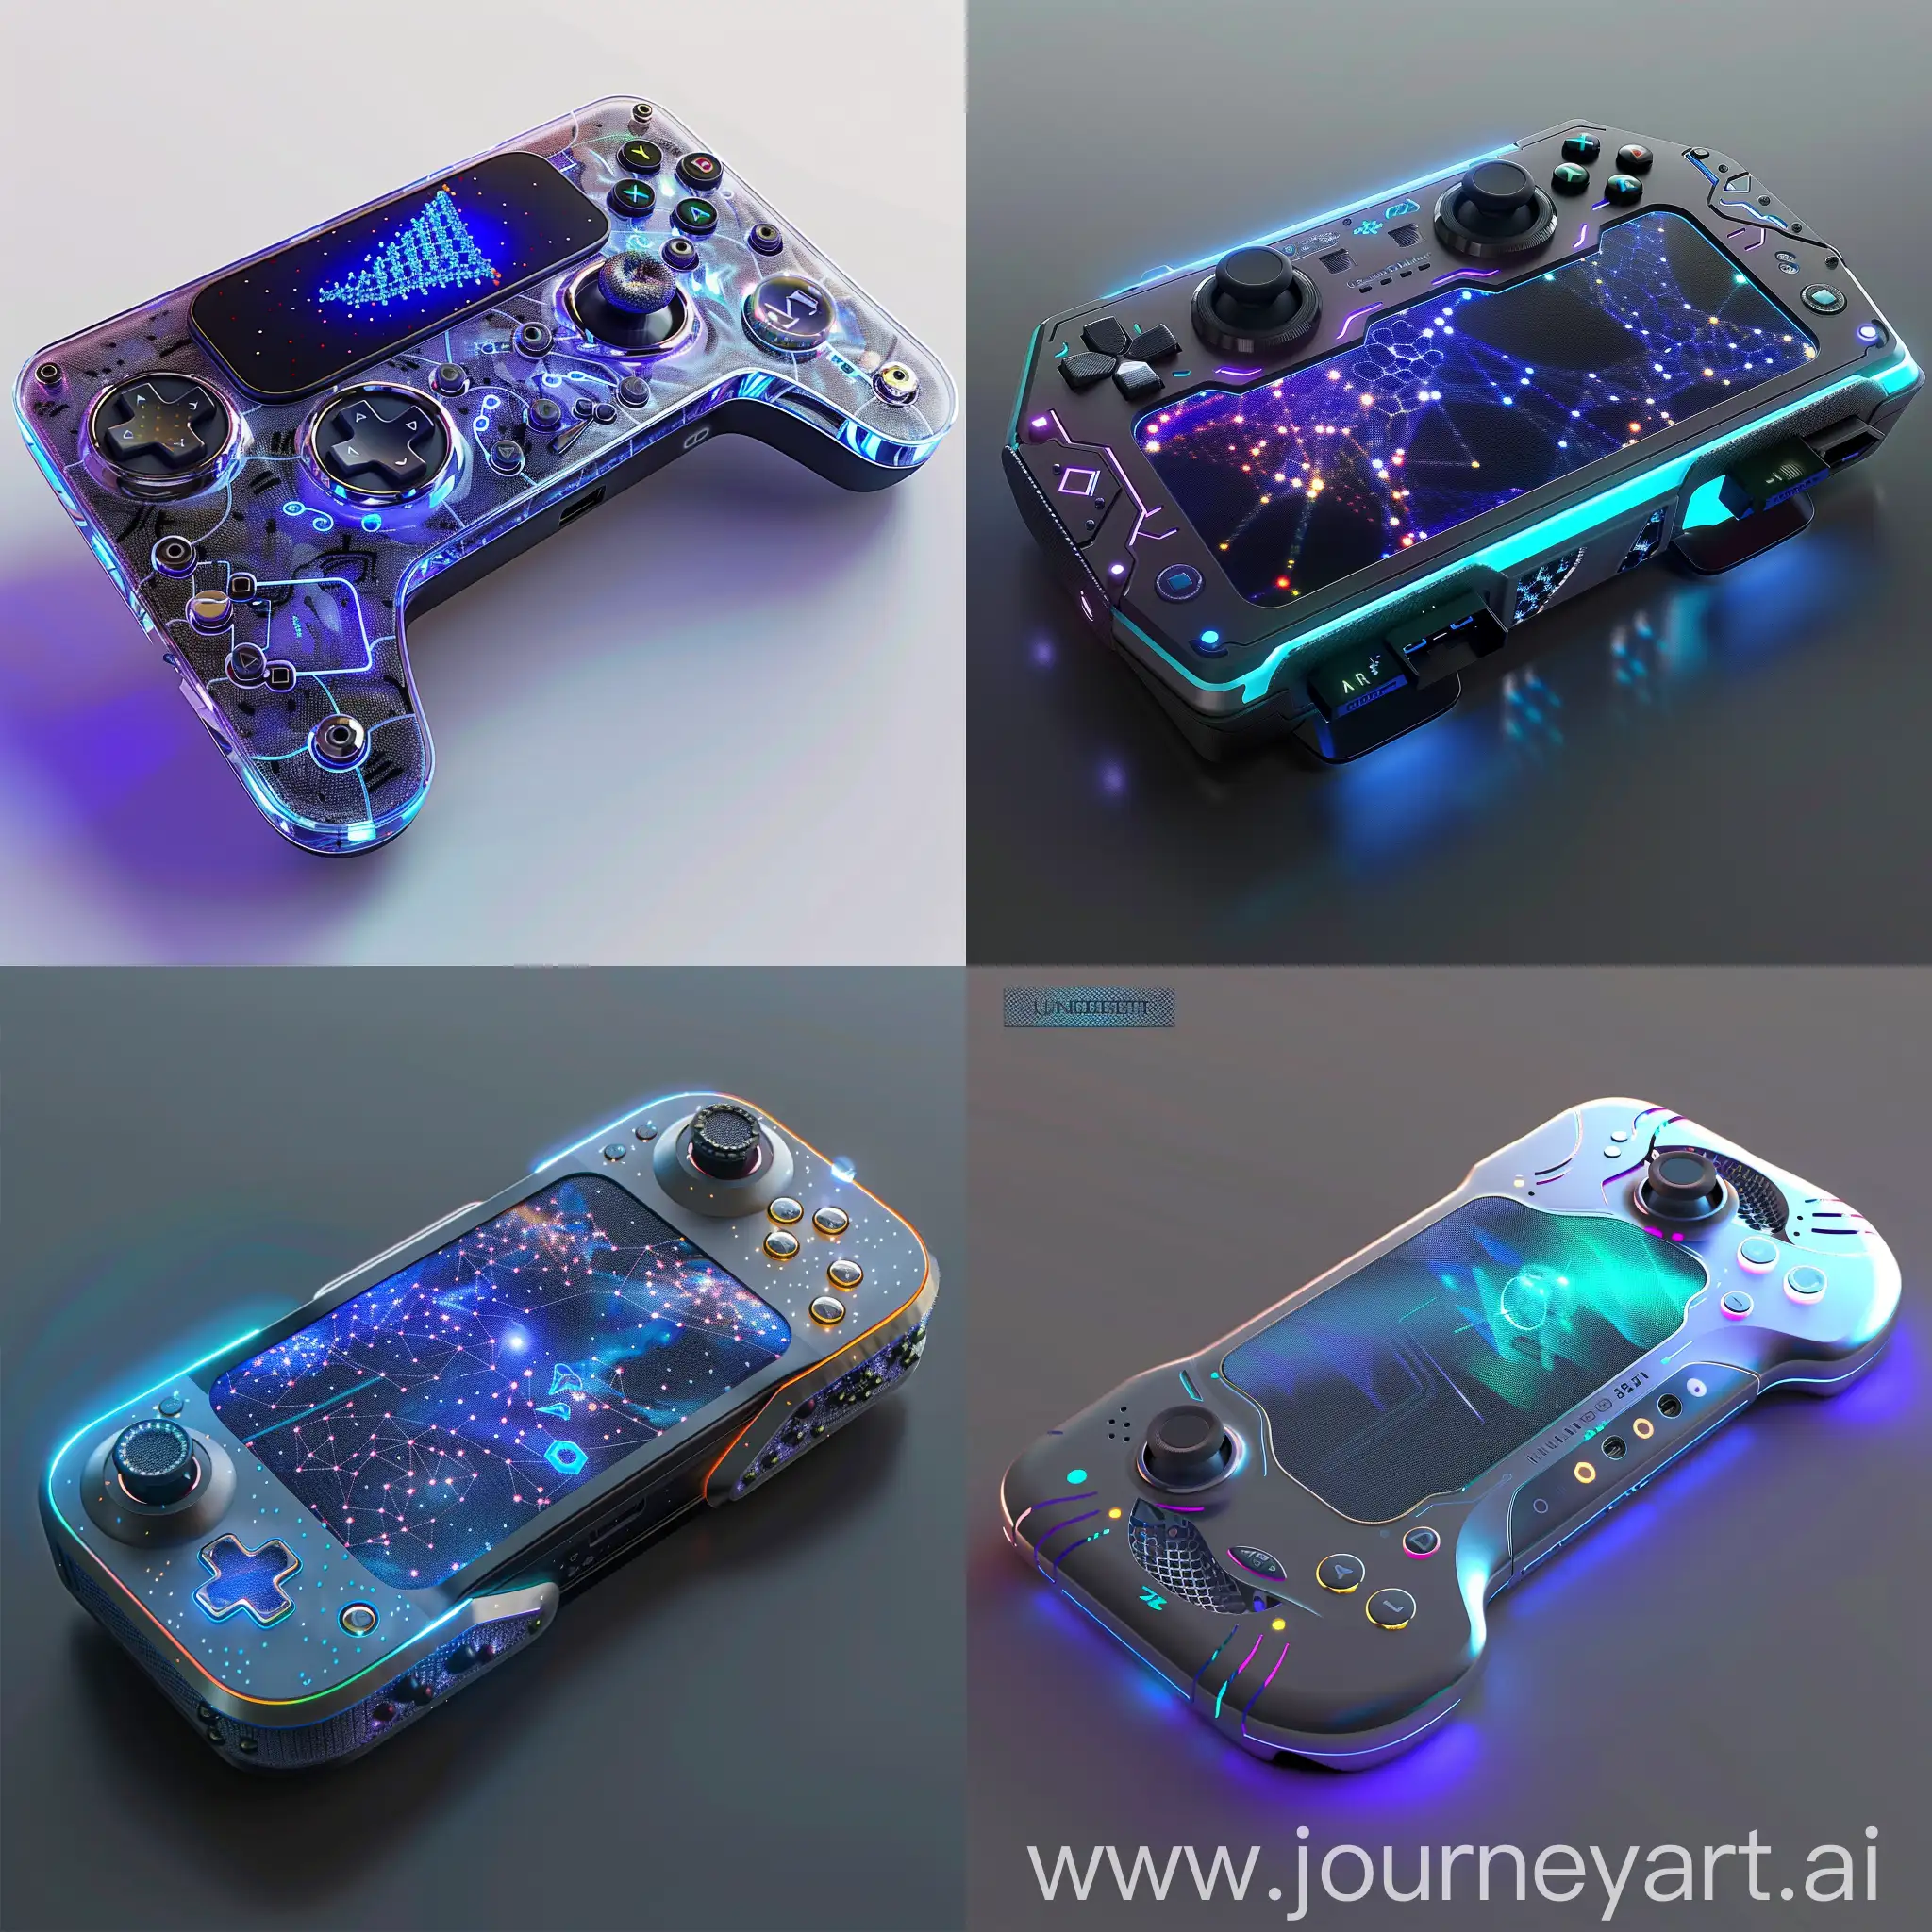 Futuristic-Portable-Gaming-Console-with-Quantum-Processor-and-Holographic-Display